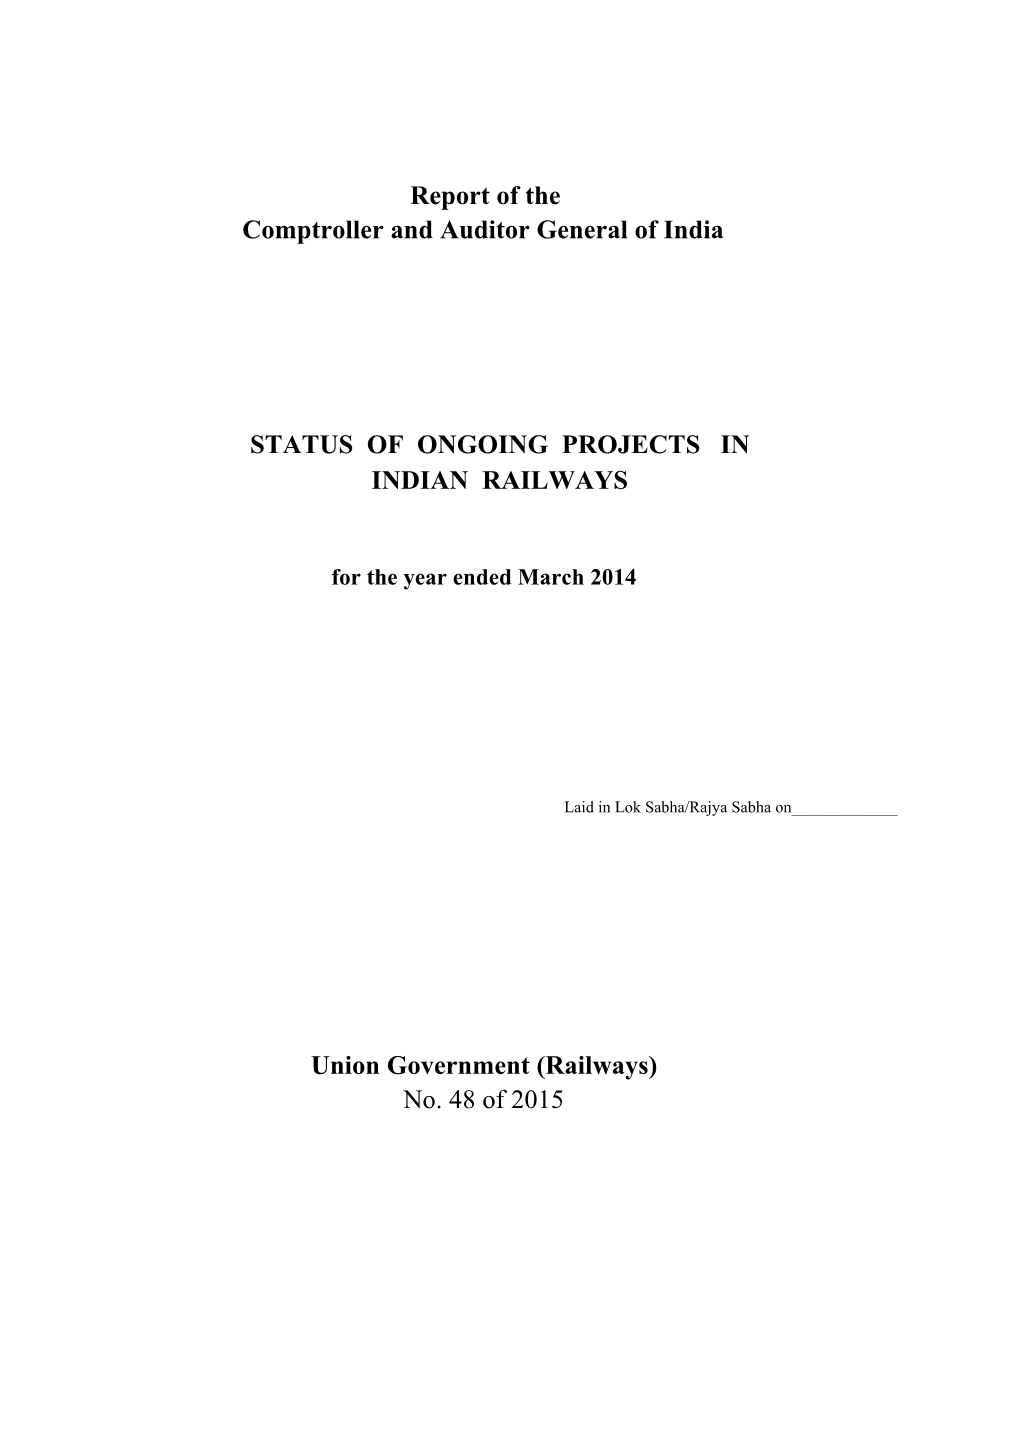 Report of the Comptroller and Auditor General of India STATUS OF